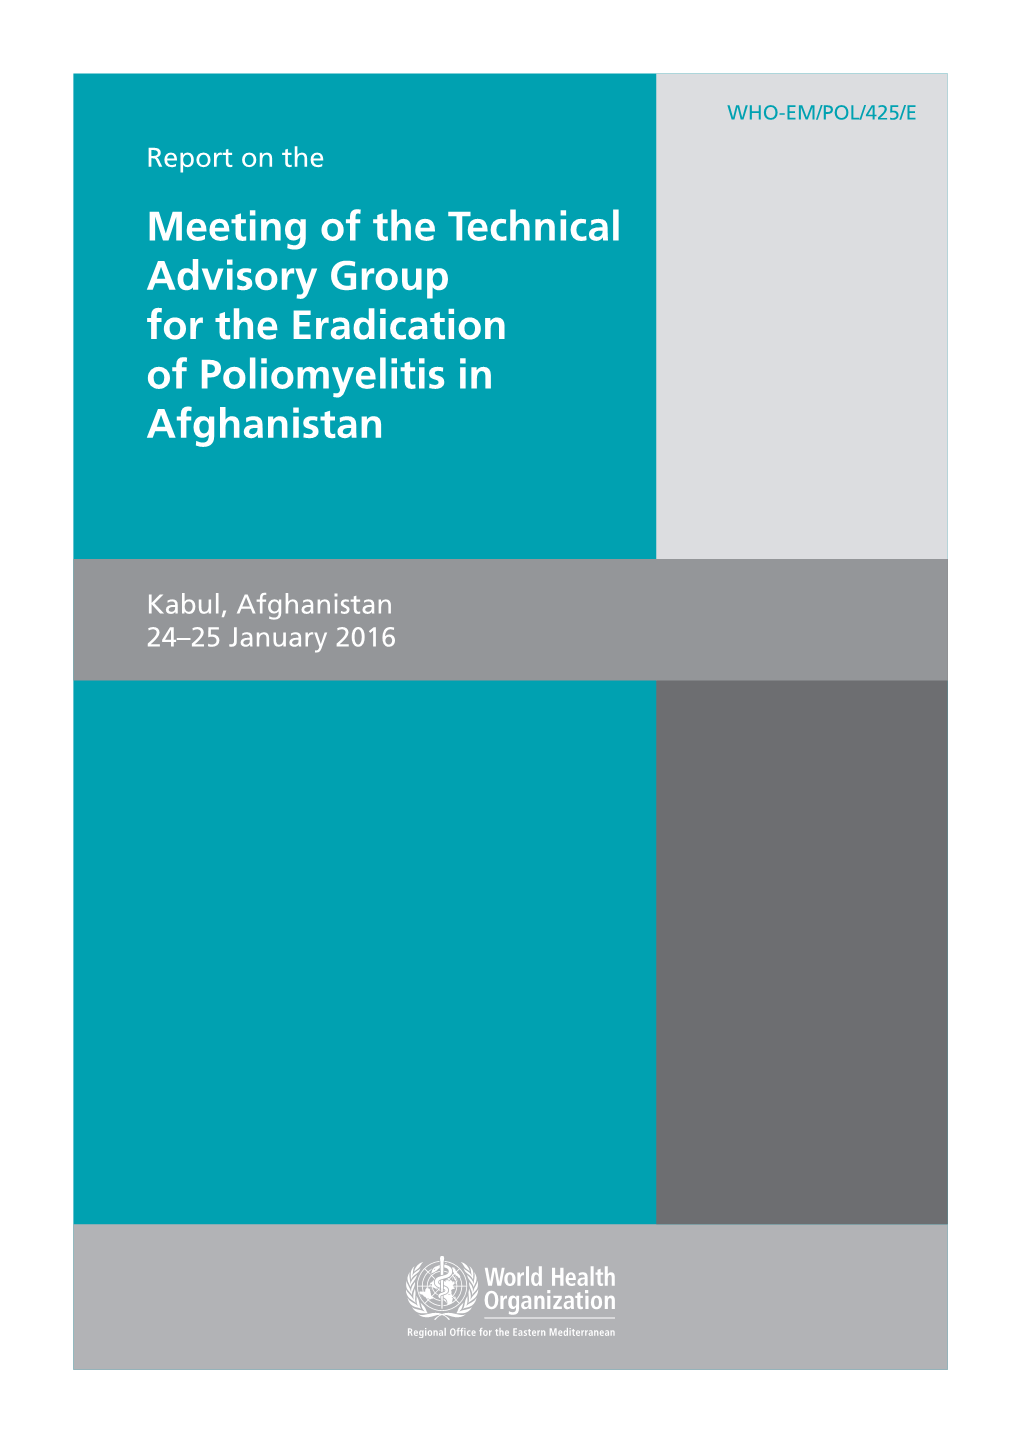 Meeting of the Technical Advisory Group for the Eradication of Poliomyelitis in Afghanistan